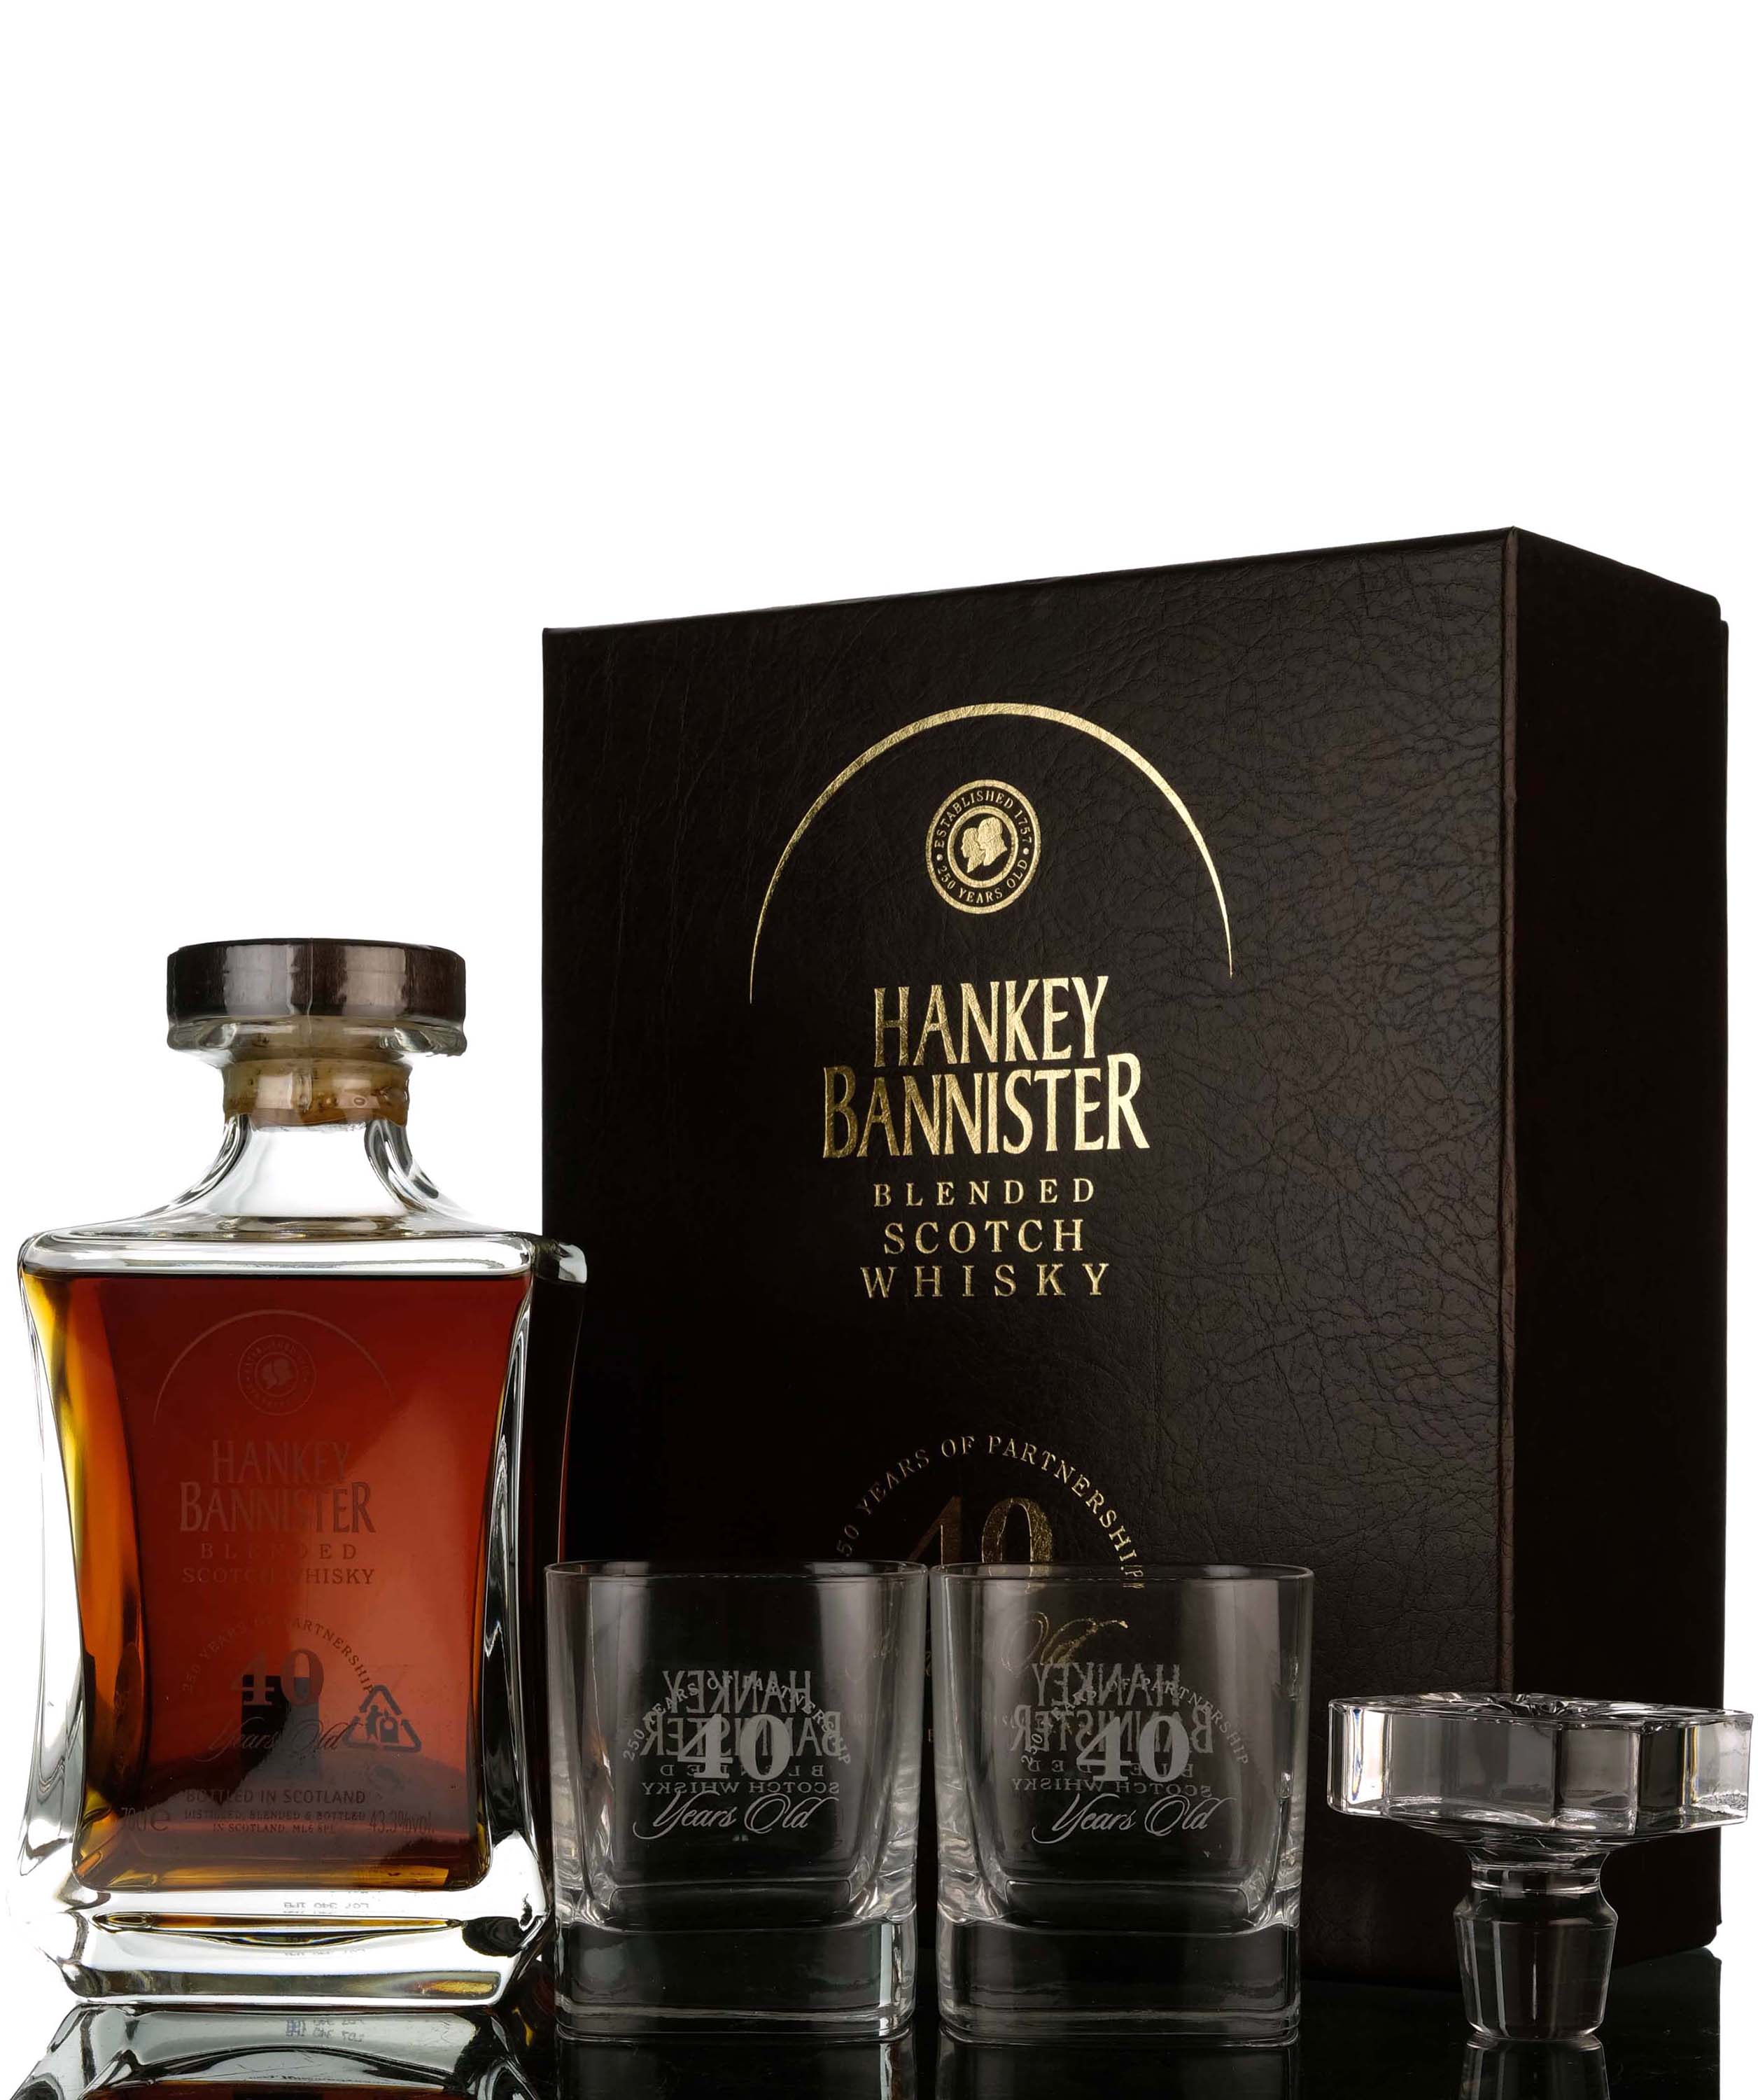 Hankey Bannister 40 Year Old - 250th Anniversary 1757-2007 - Glencairn Crystal Decanter & 